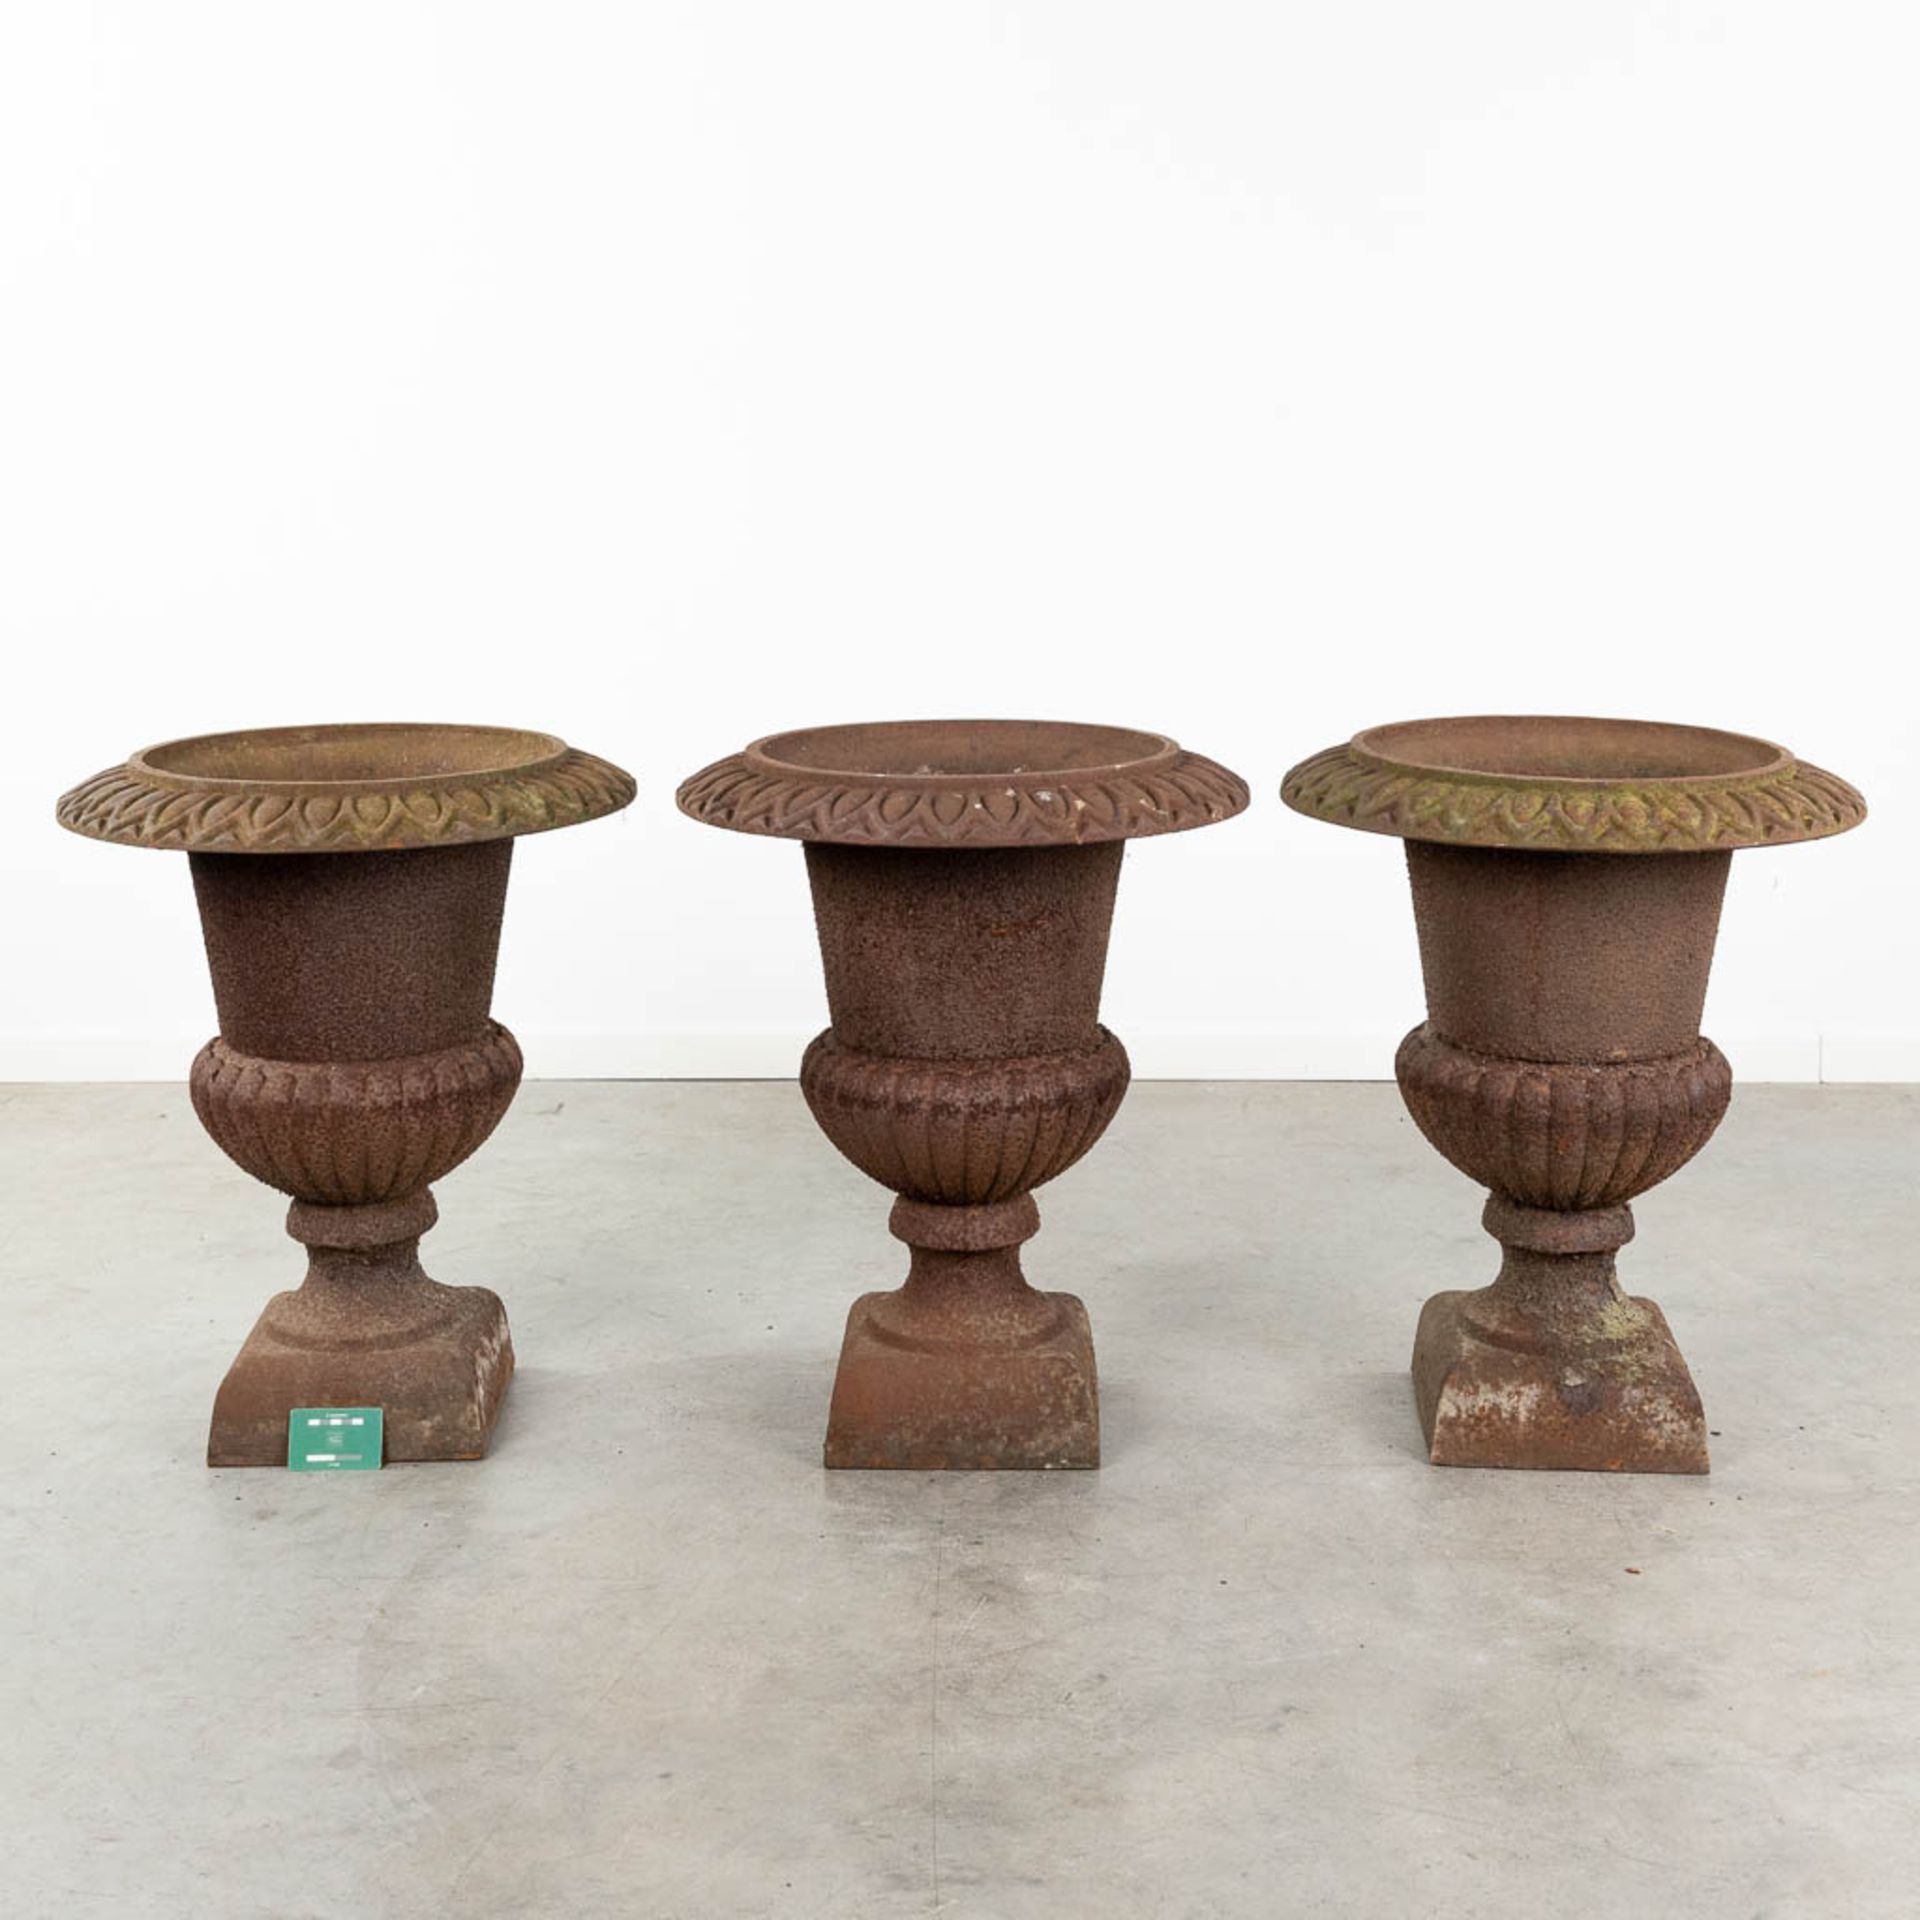 A collection of 3 large garden vases made of cast iron. (H: 67 x D: 55 cm) - Image 2 of 9